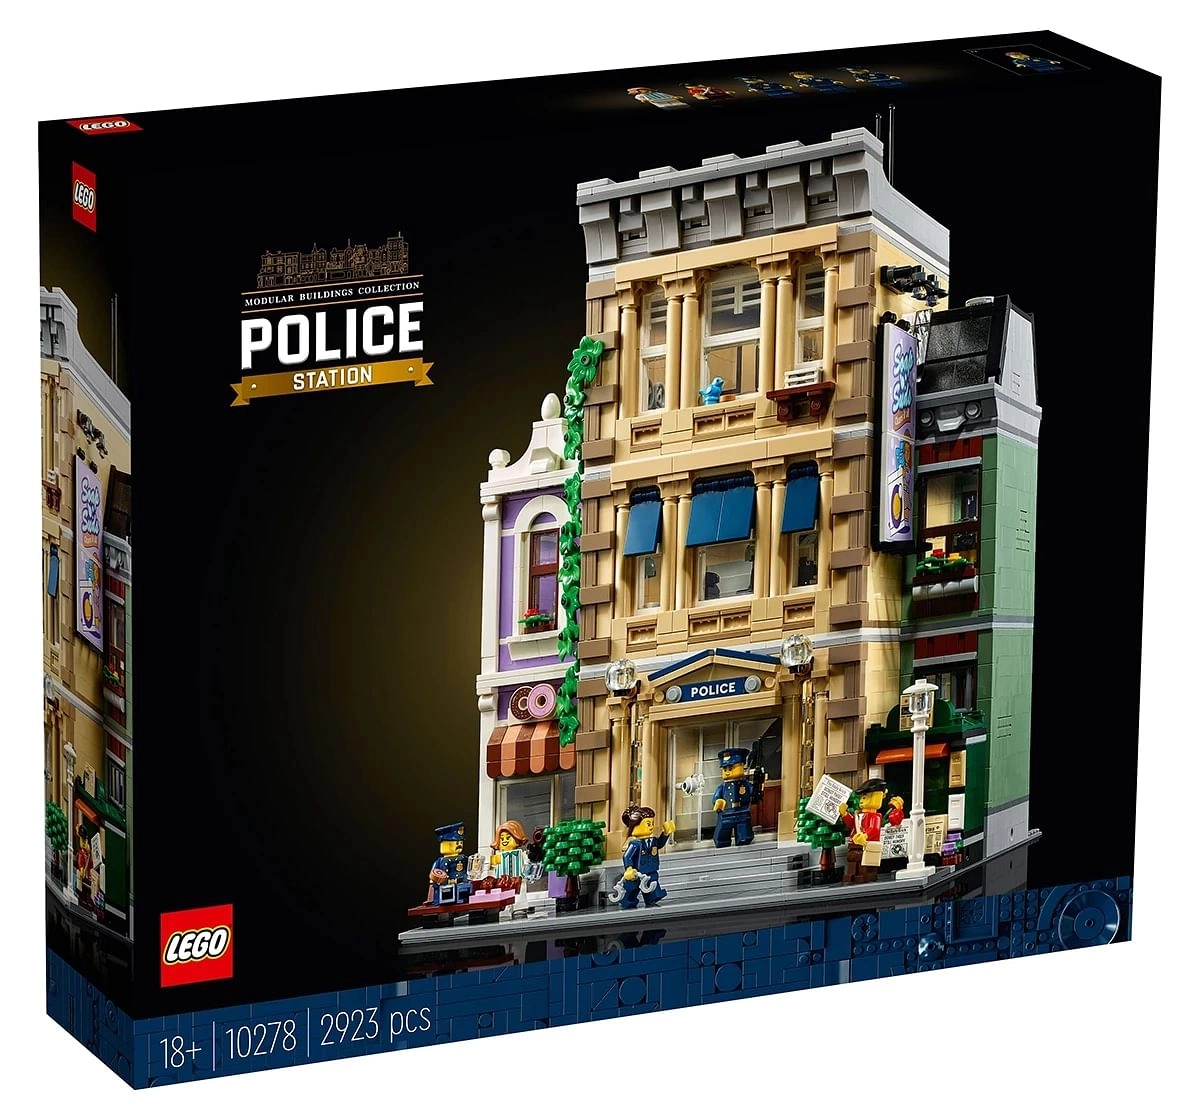 LEGO Police Station 10278 Building Kit (2,923 Pieces)